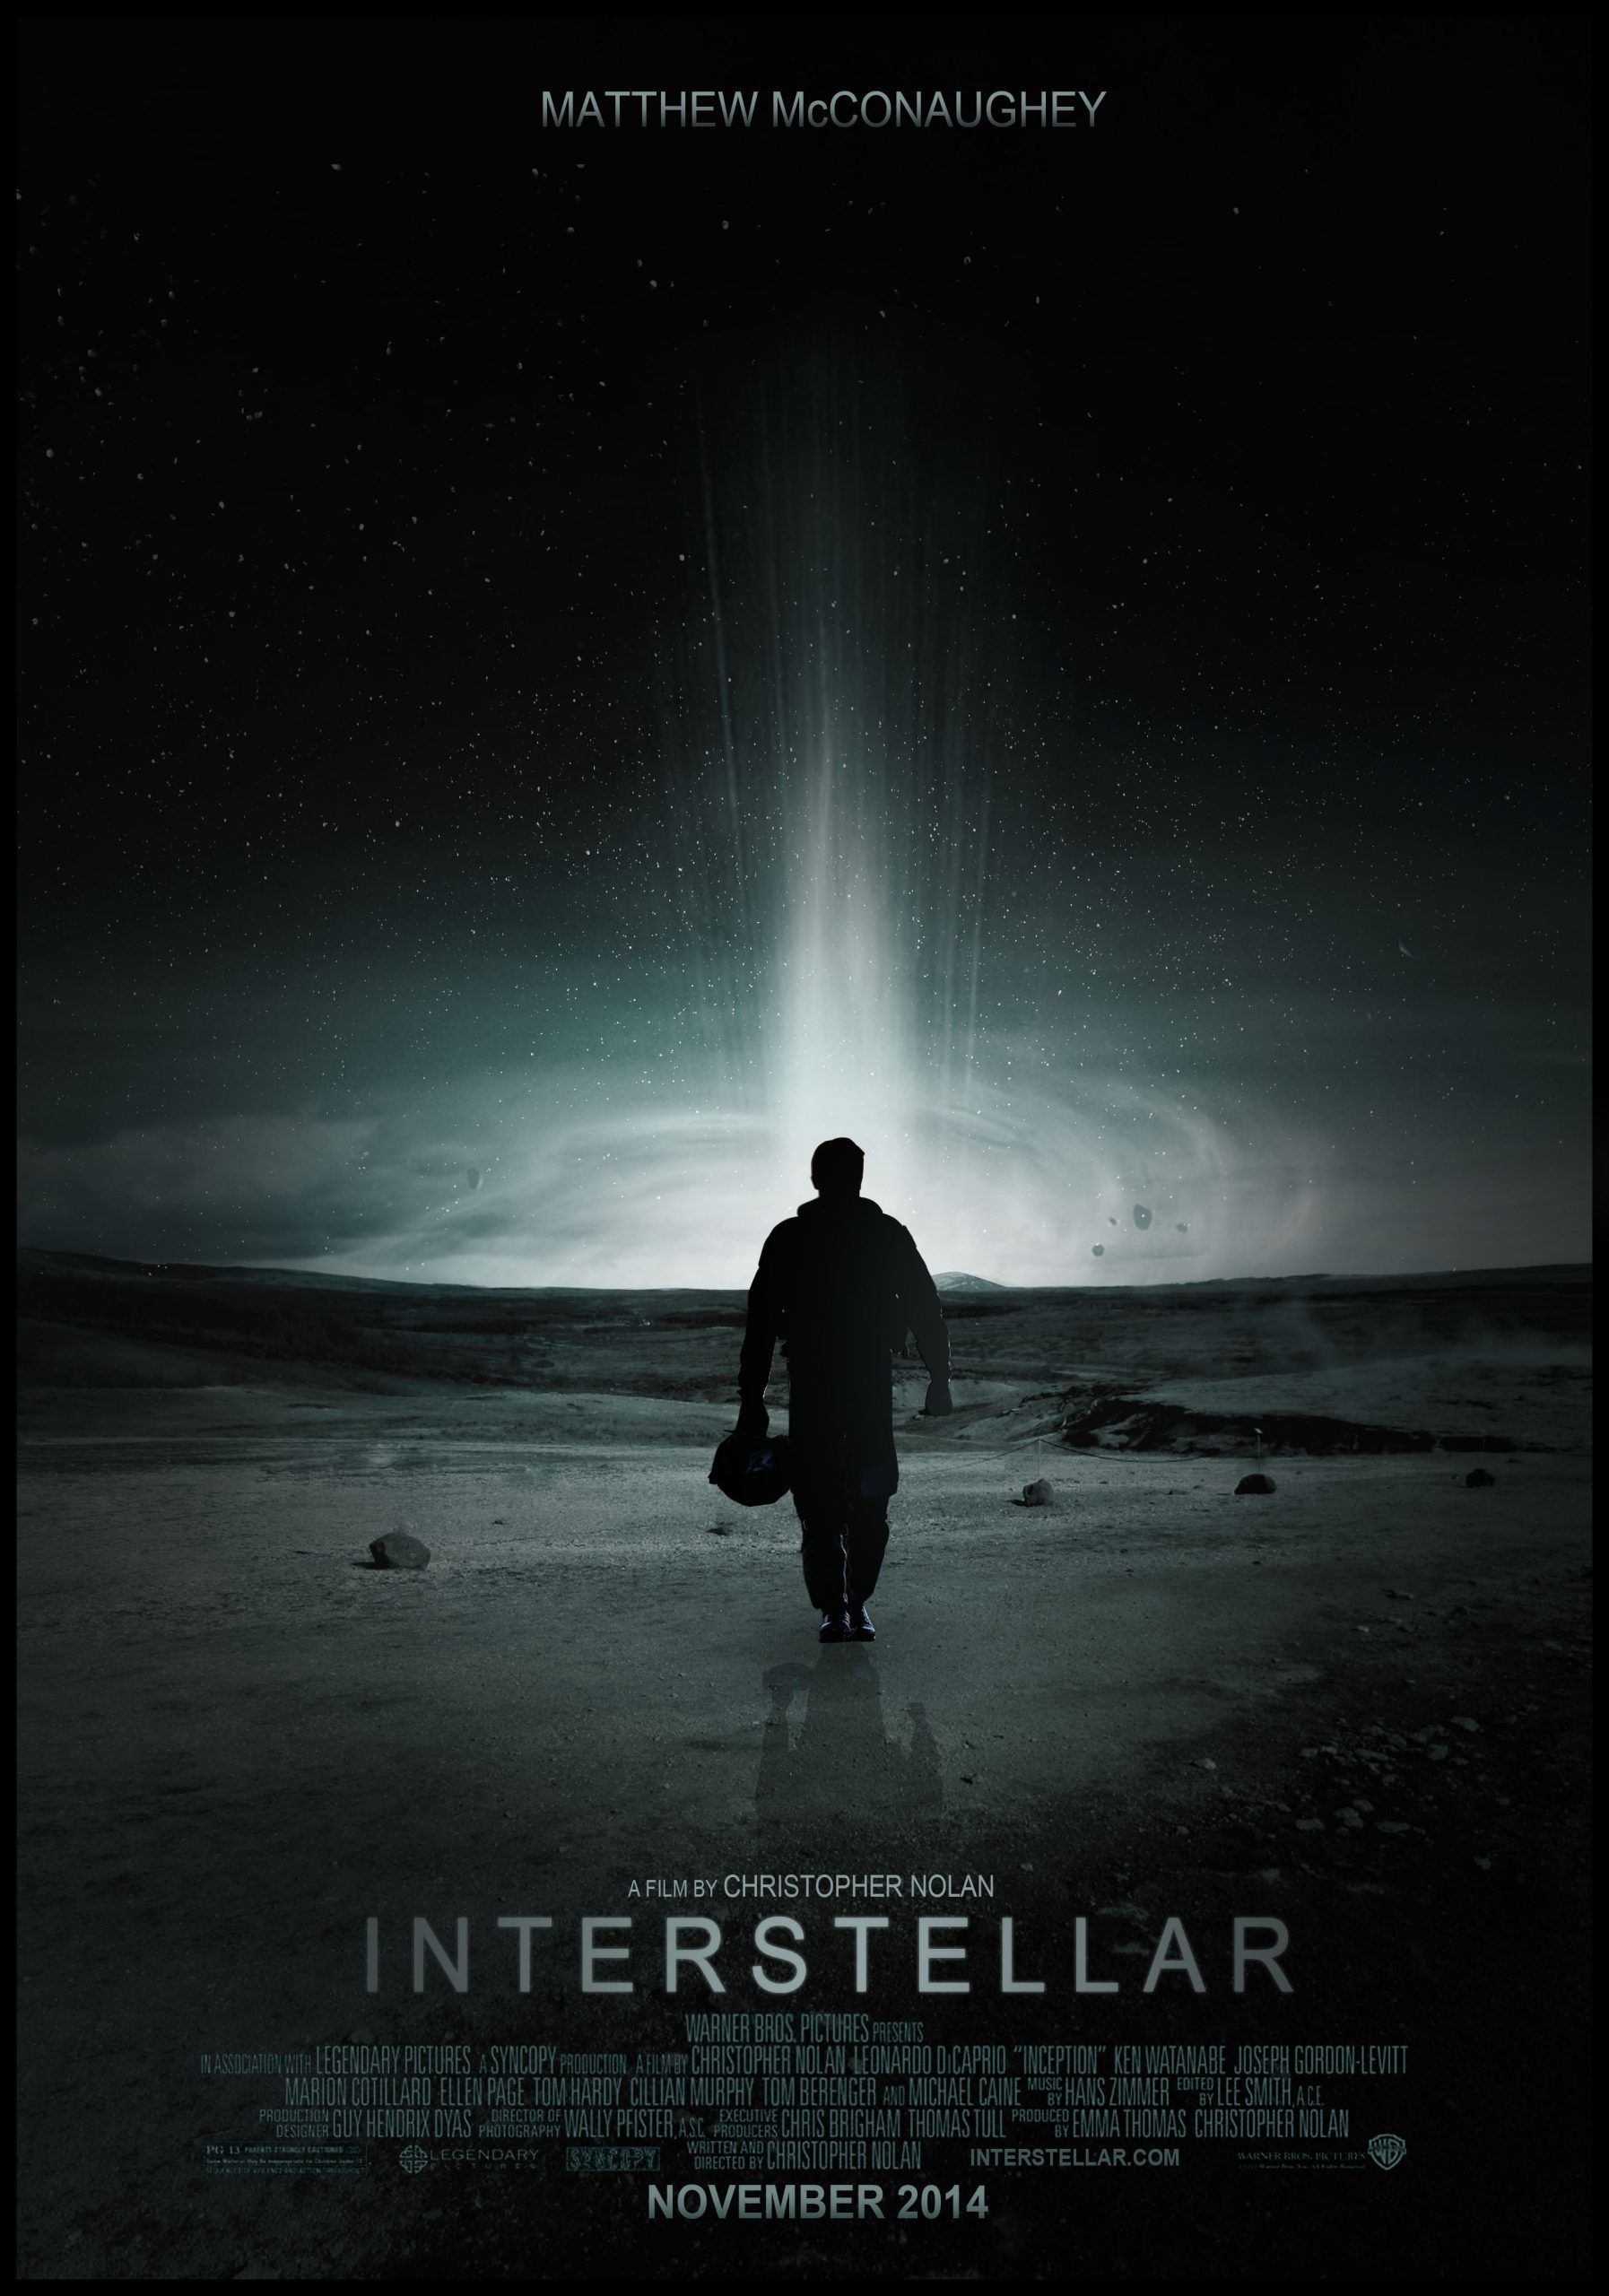 Interstellar confuses and frustrates - The Signal